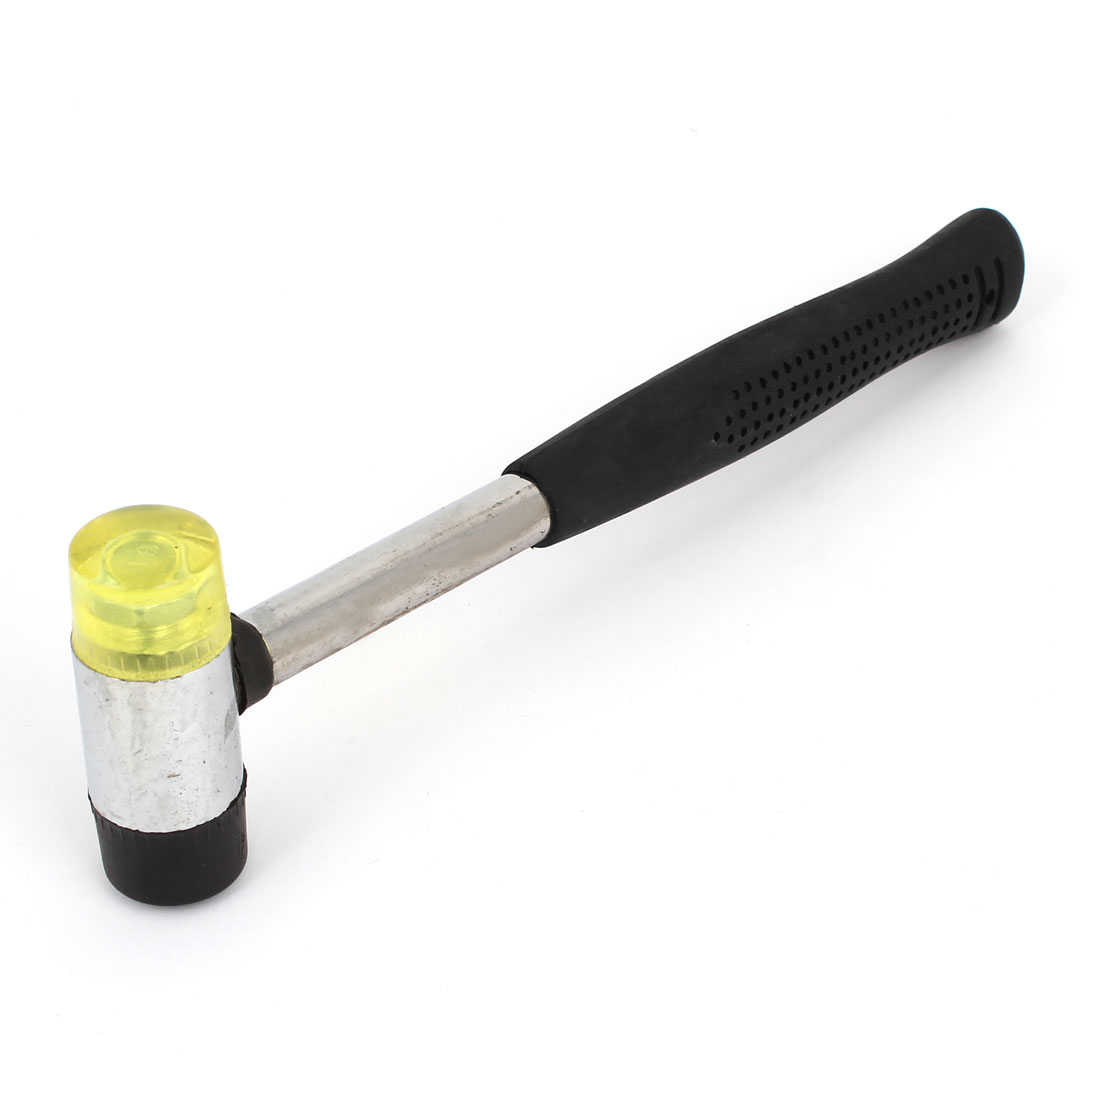 Unique Bargains Household Hand Tool 22cm Long Rubber Coated Grip Mallet Hammer 8.7' Length